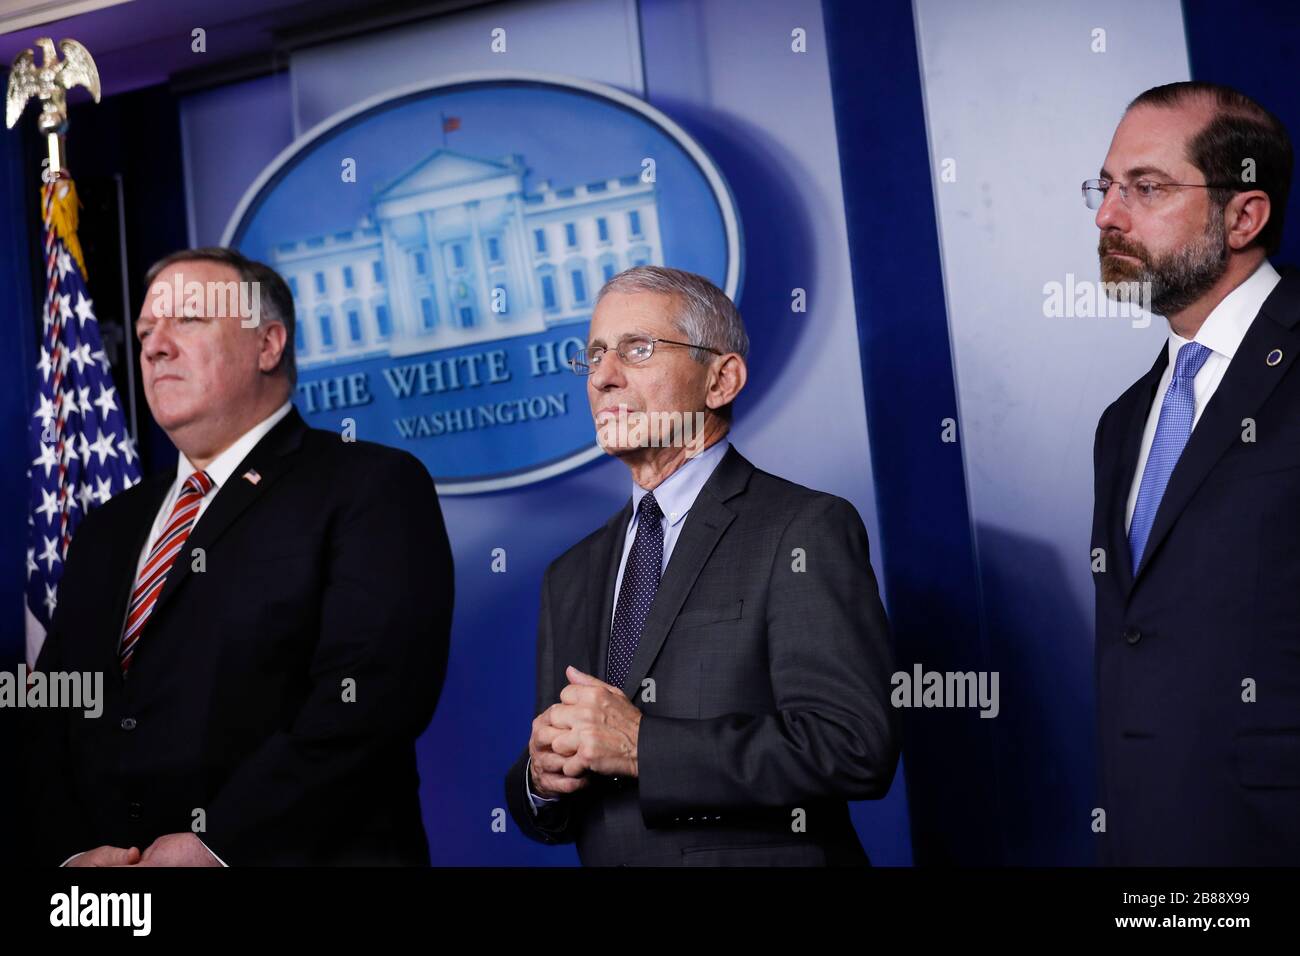 United States Secretary of State Mike Pompeo, from right, Director of the National Institute of Allergy and Infectious Diseases at the National Institutes of Health Dr. Anthony Fauci, and United States Secretary of Health and Human Services (HHS) Alex Azar, listen during a Coronavirus Task Force news conference in the briefing room of the White House in Washington DC, U.S., on Friday, March 20, 2020. Americans will have to practice social distancing for at least several more weeks to mitigate U.S. cases of Covid-19, Director of the National Institute of Allergy and Infectious Diseases at th Stock Photo